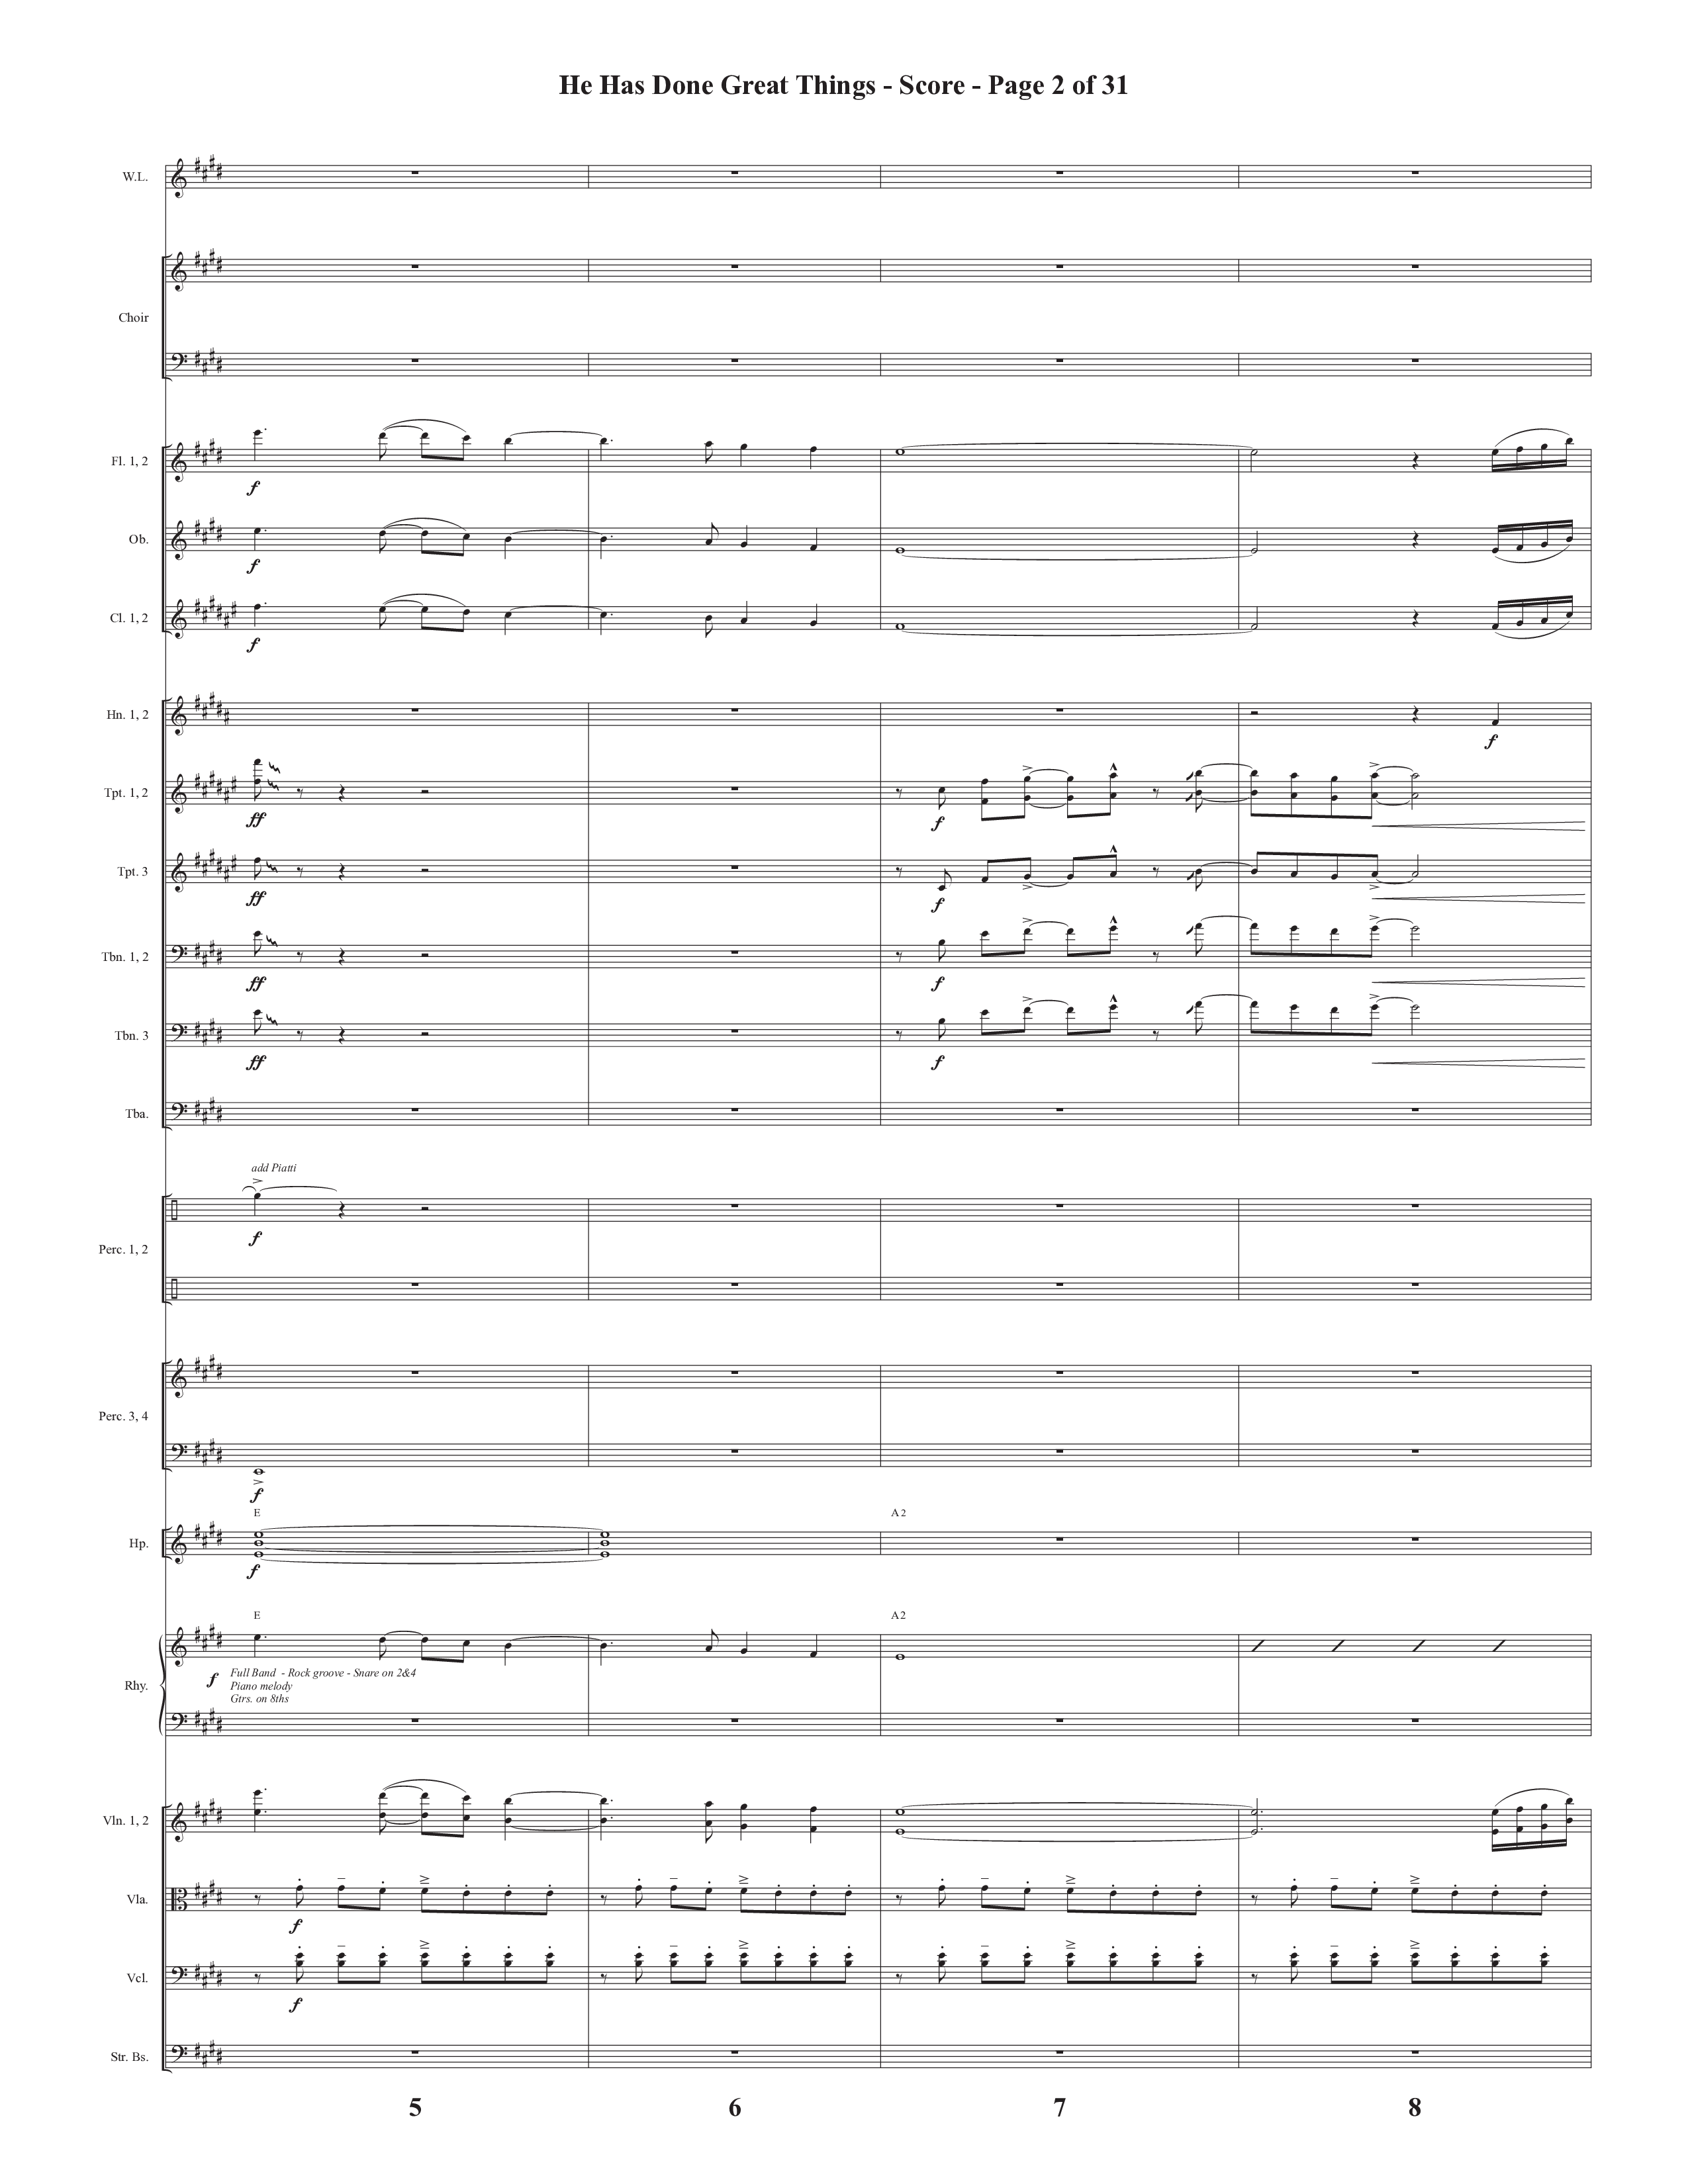 He Has Done Great Things (The Magnificat) (Choral Anthem SATB) Conductor's Score (Semsen Music / Arr. John Bolin / Orch. Cliff Duren)